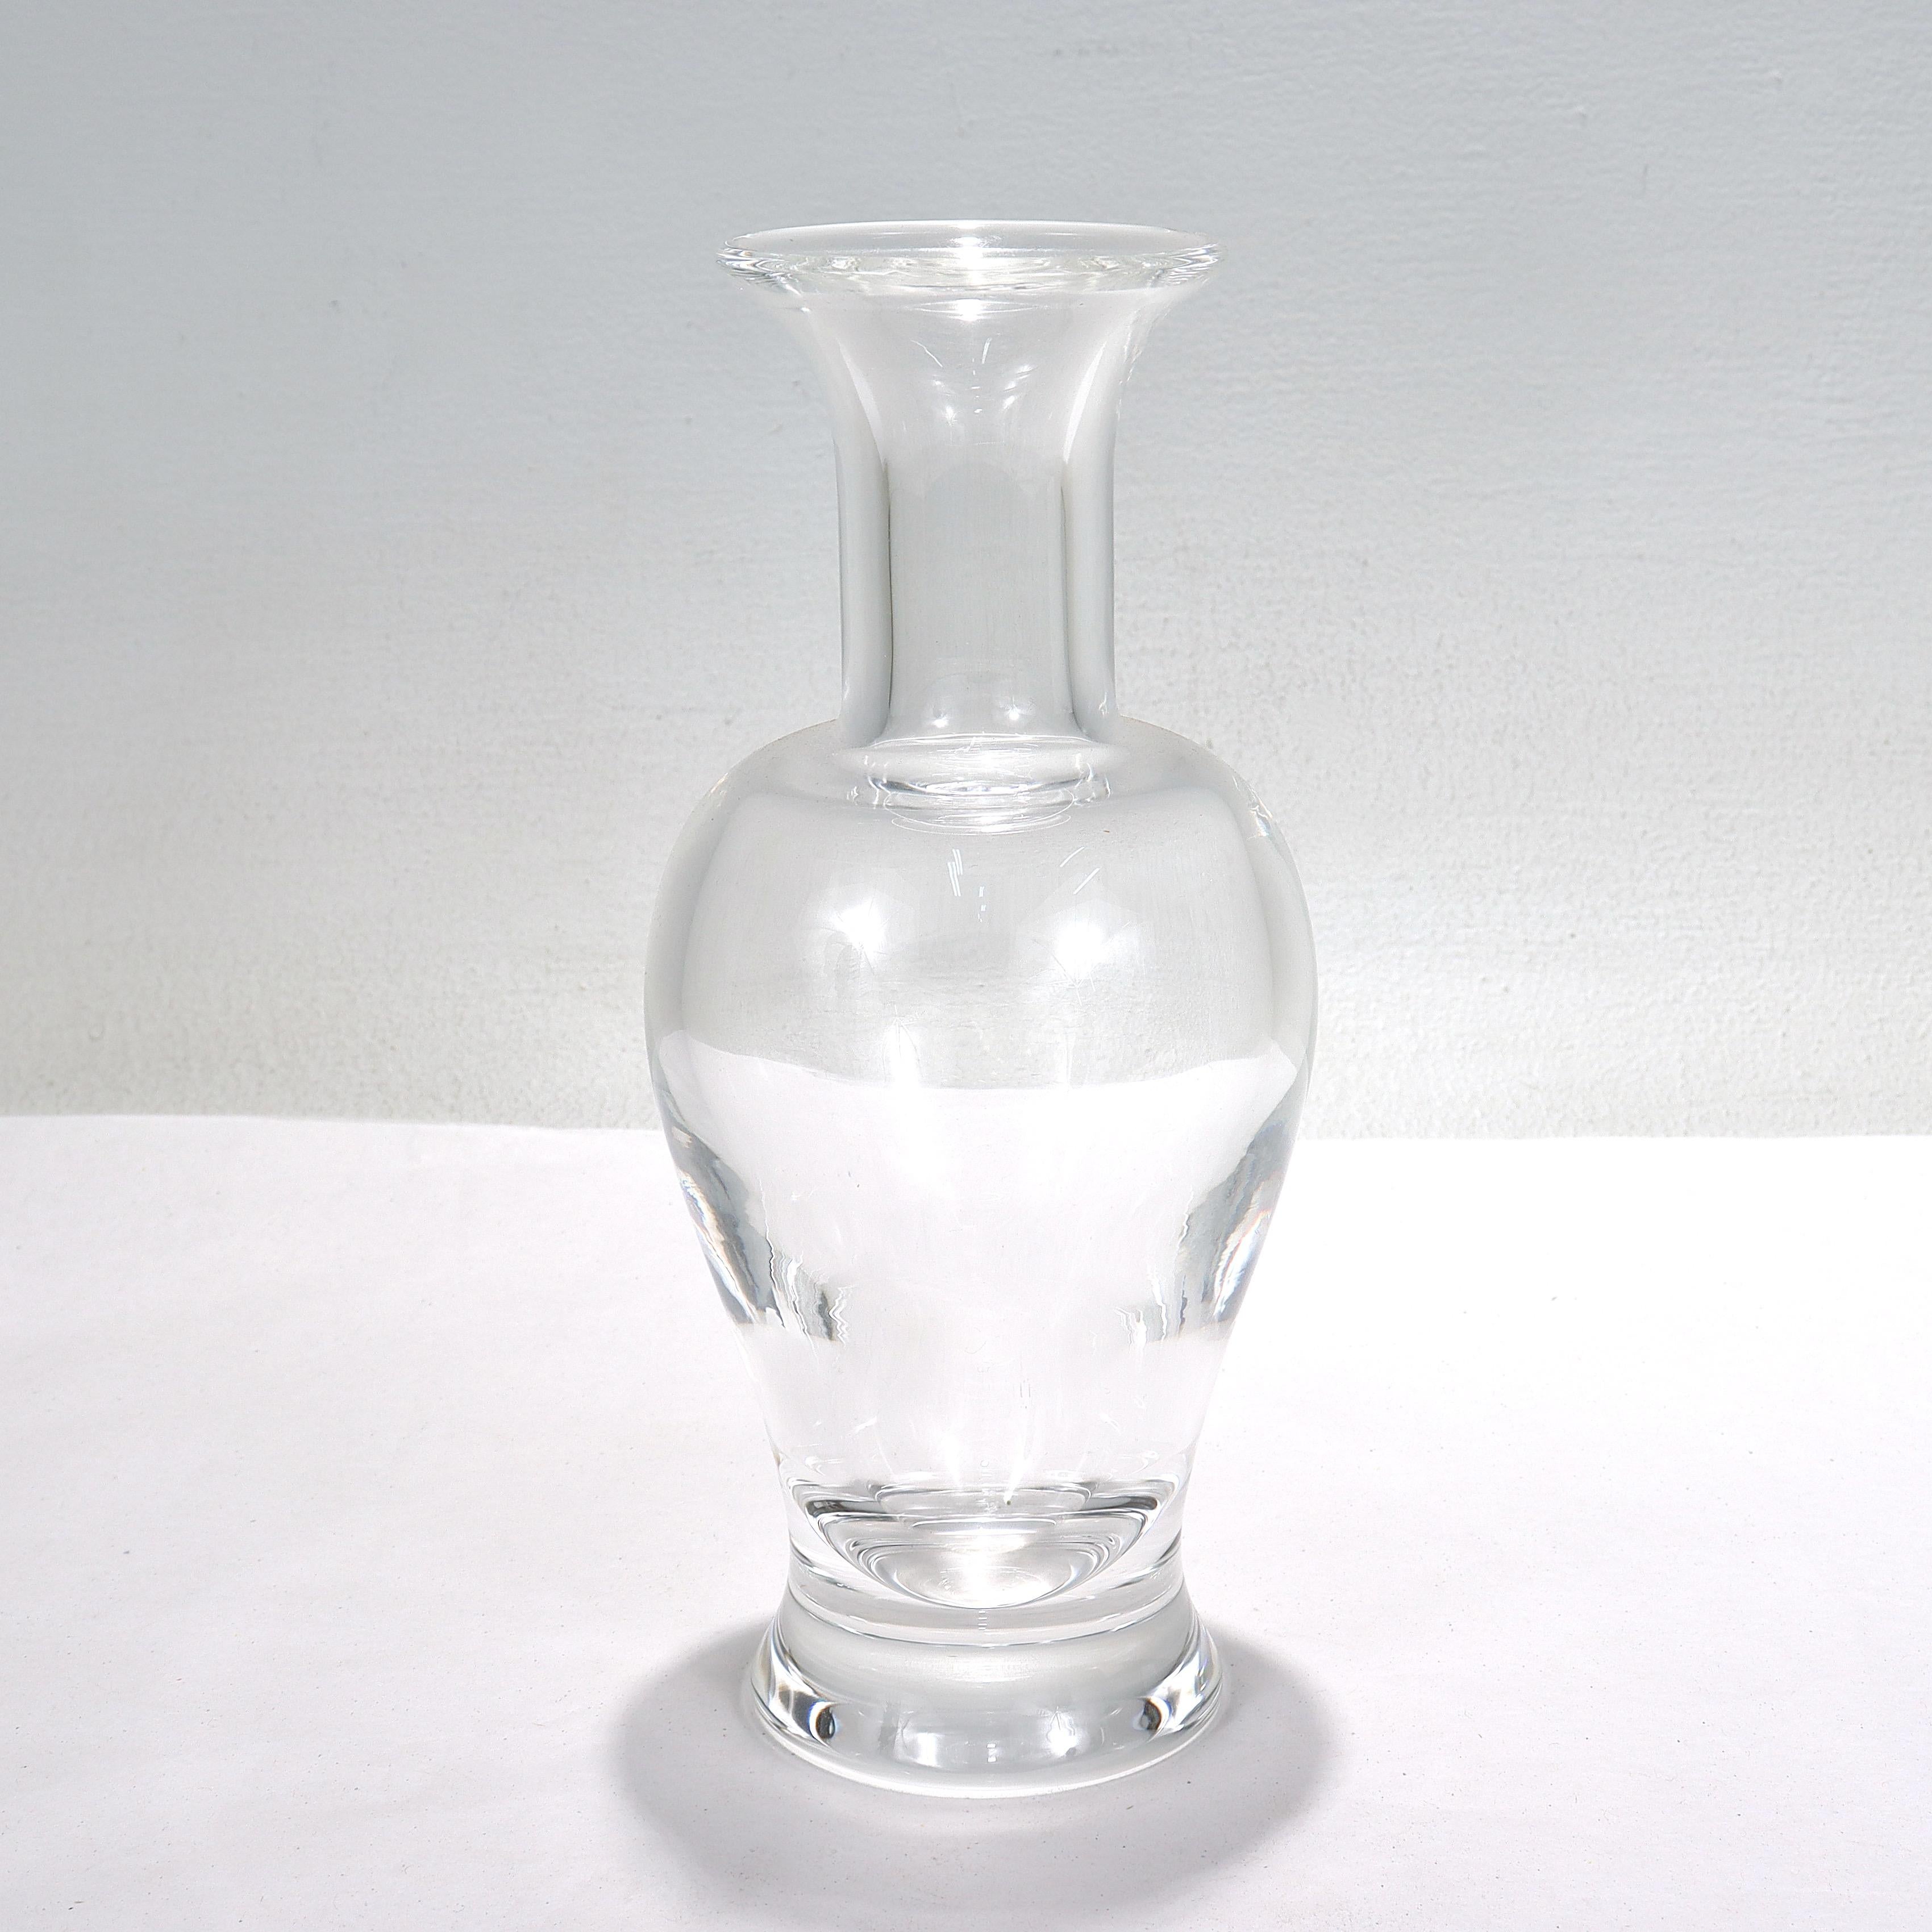 A fine art glass vase.

By Steuben.

The Palace vase model no. 8354.

Designed by Donald Pollard in 1977.

With a classic vasiform shape.

Simply a great vase!

Date:
20th century

Overall Condition:
It is in overall good,